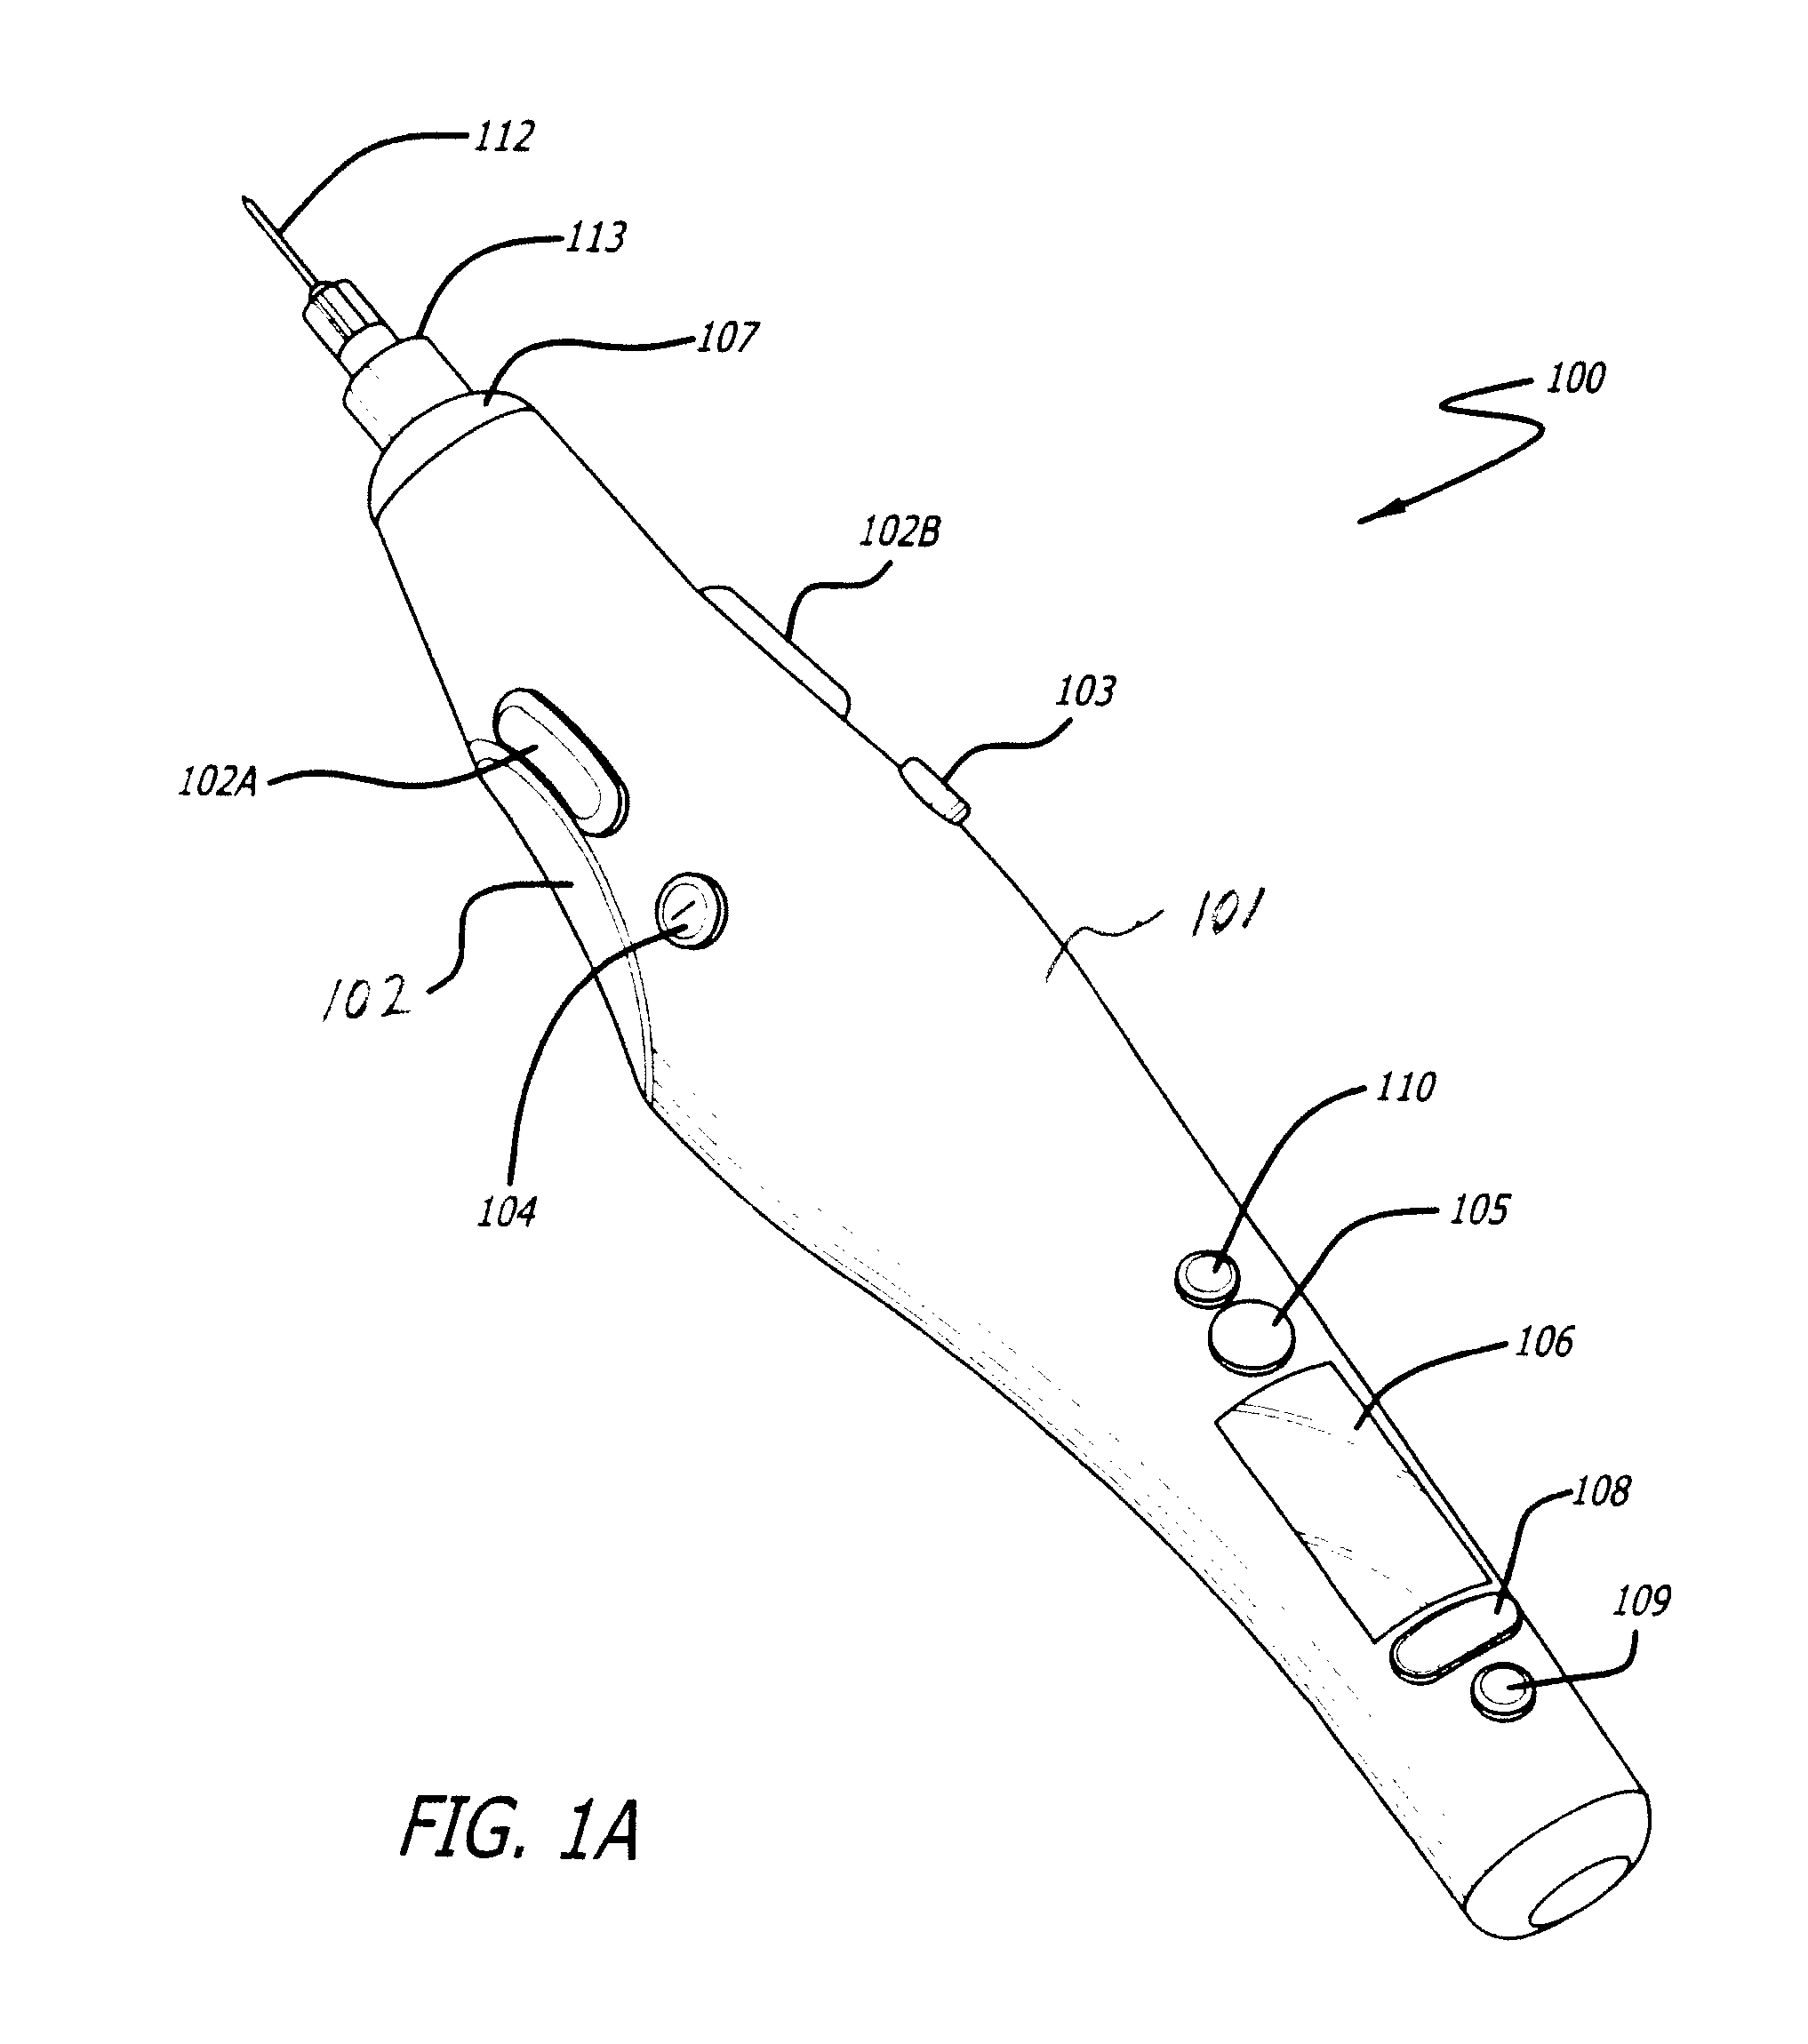 Injection device for soft-tissue augmentation fillers, bioactive agents and other biocompatible materials in liquid or gel form